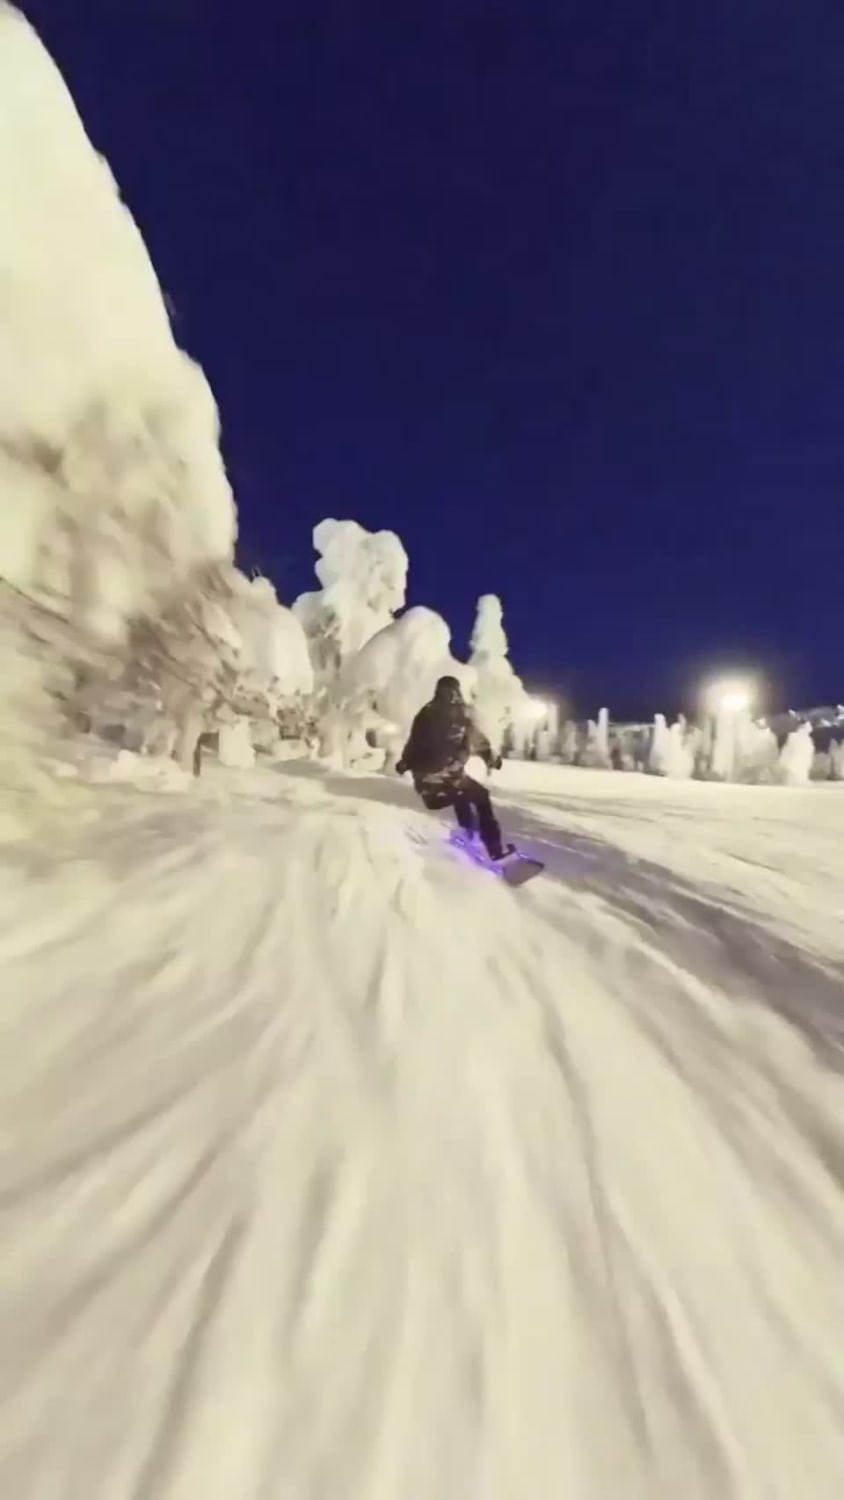 Snowboarding at night in Finland